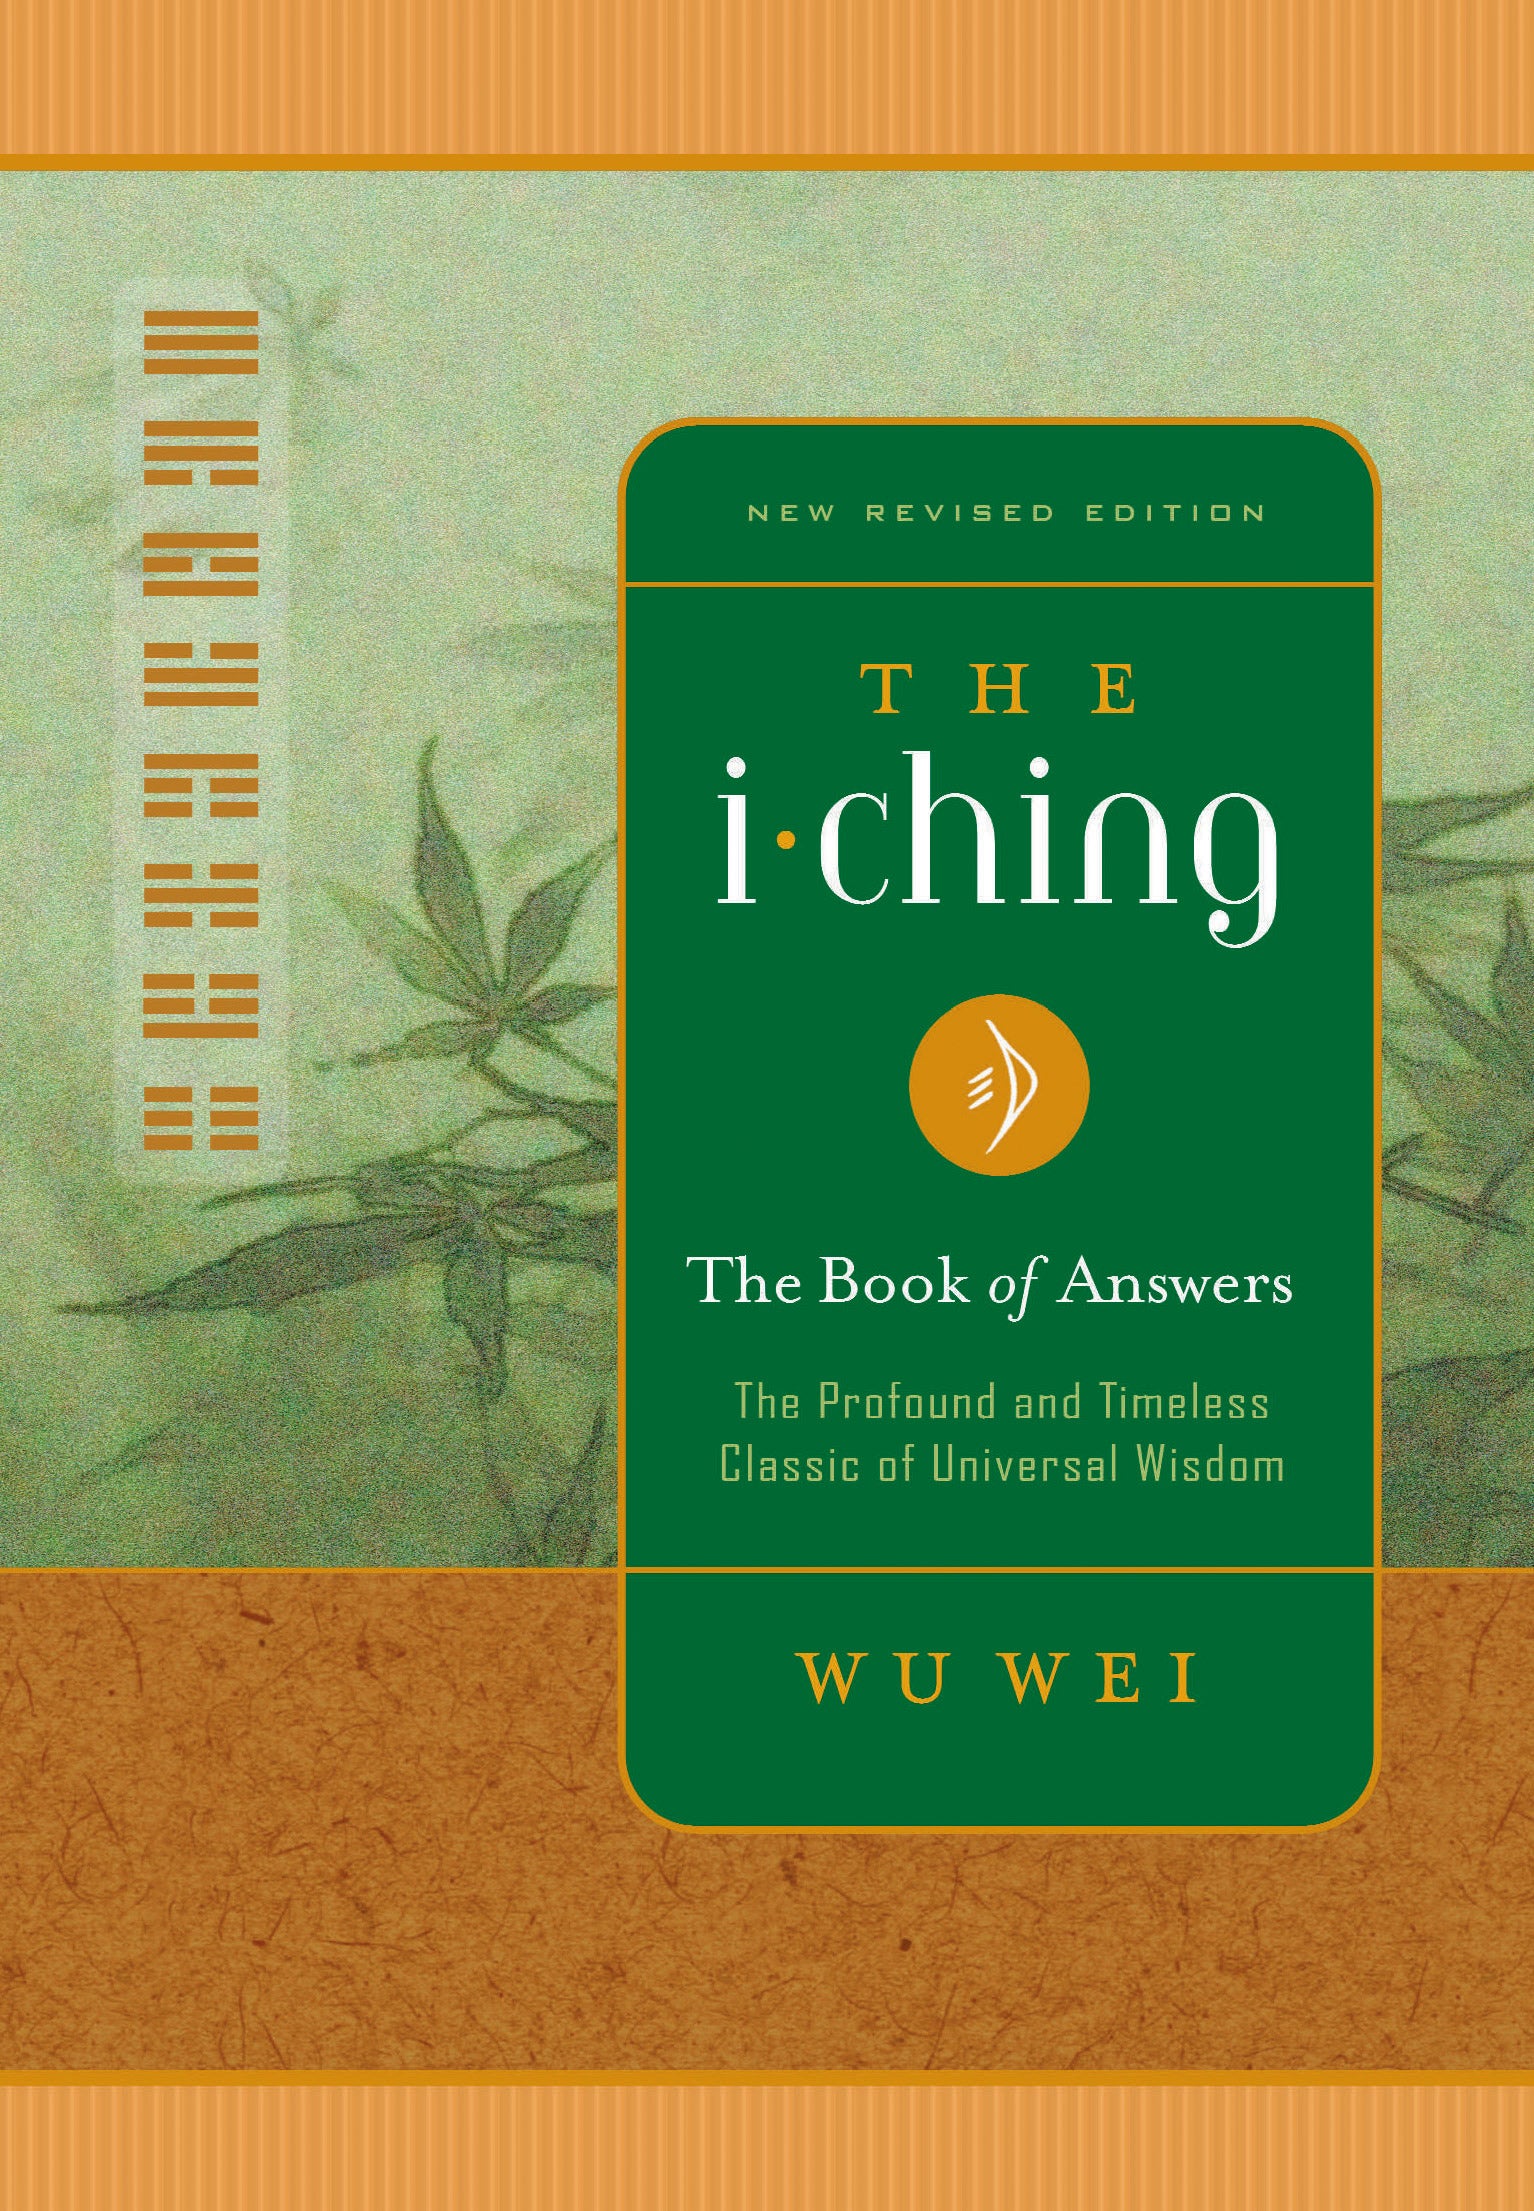 I Ching, The Book of Changes